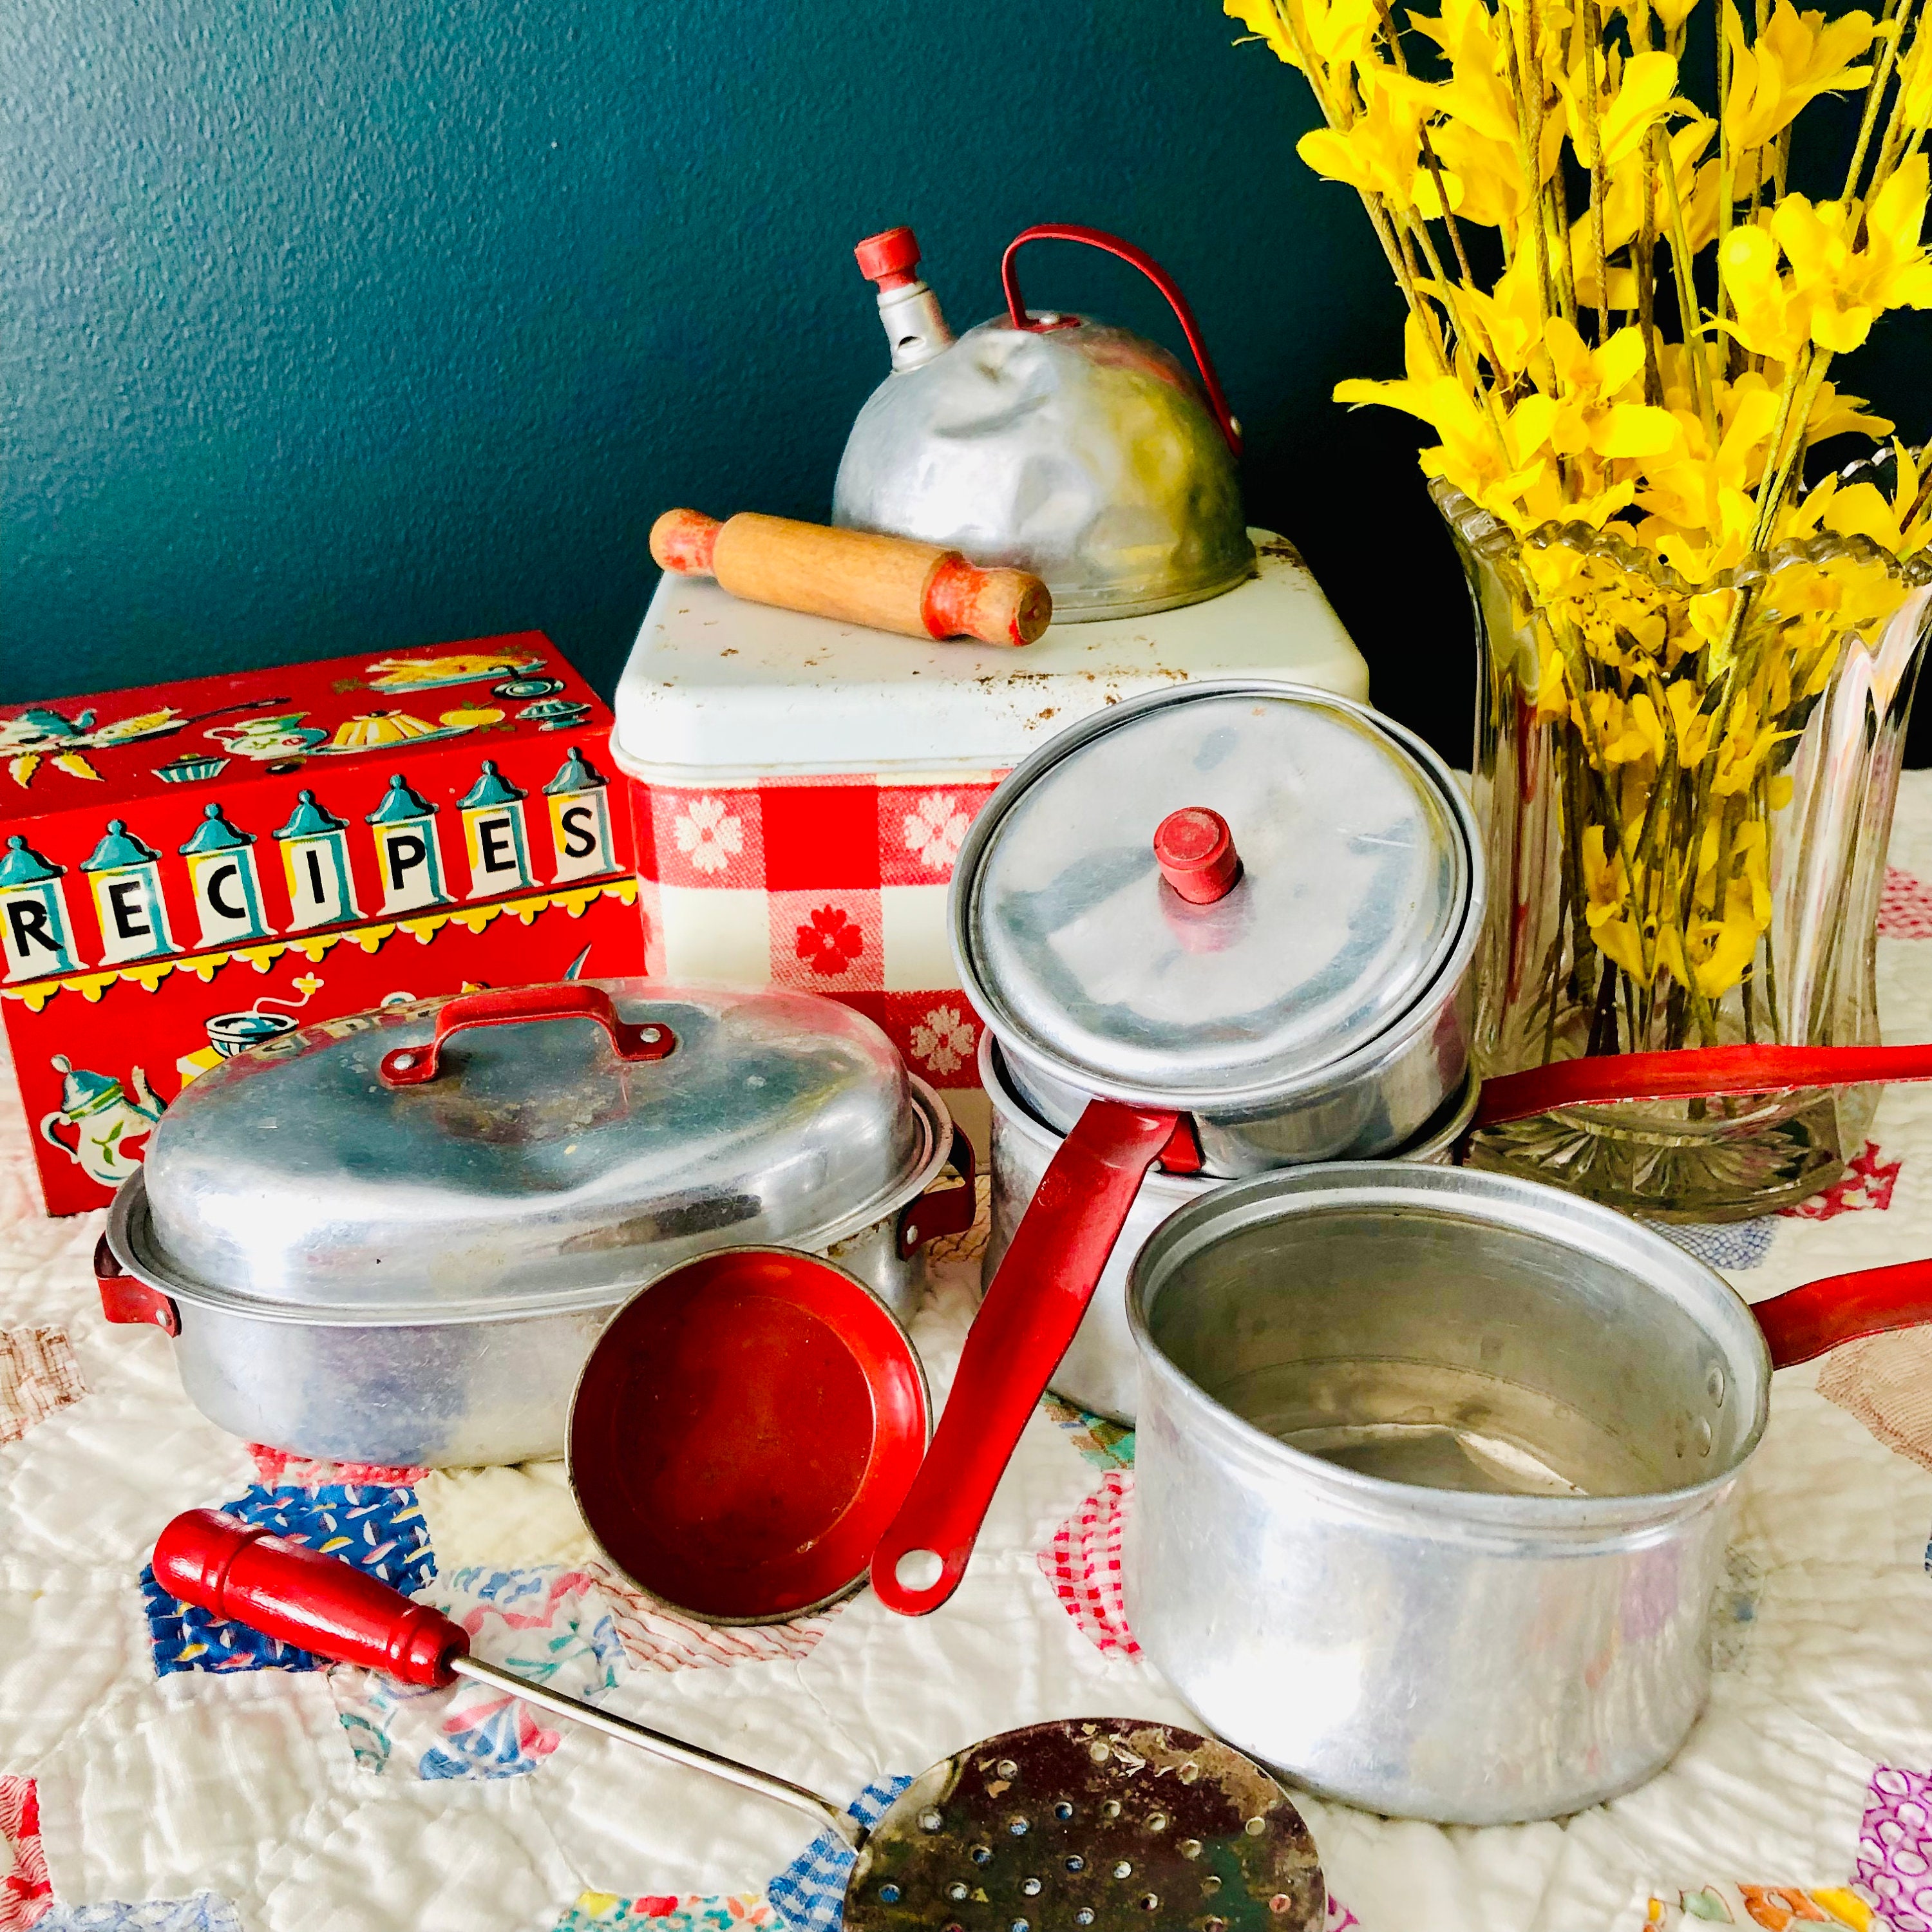 Vintage Toy Pots & Pans Set 1950s Revere Ware Silver With 